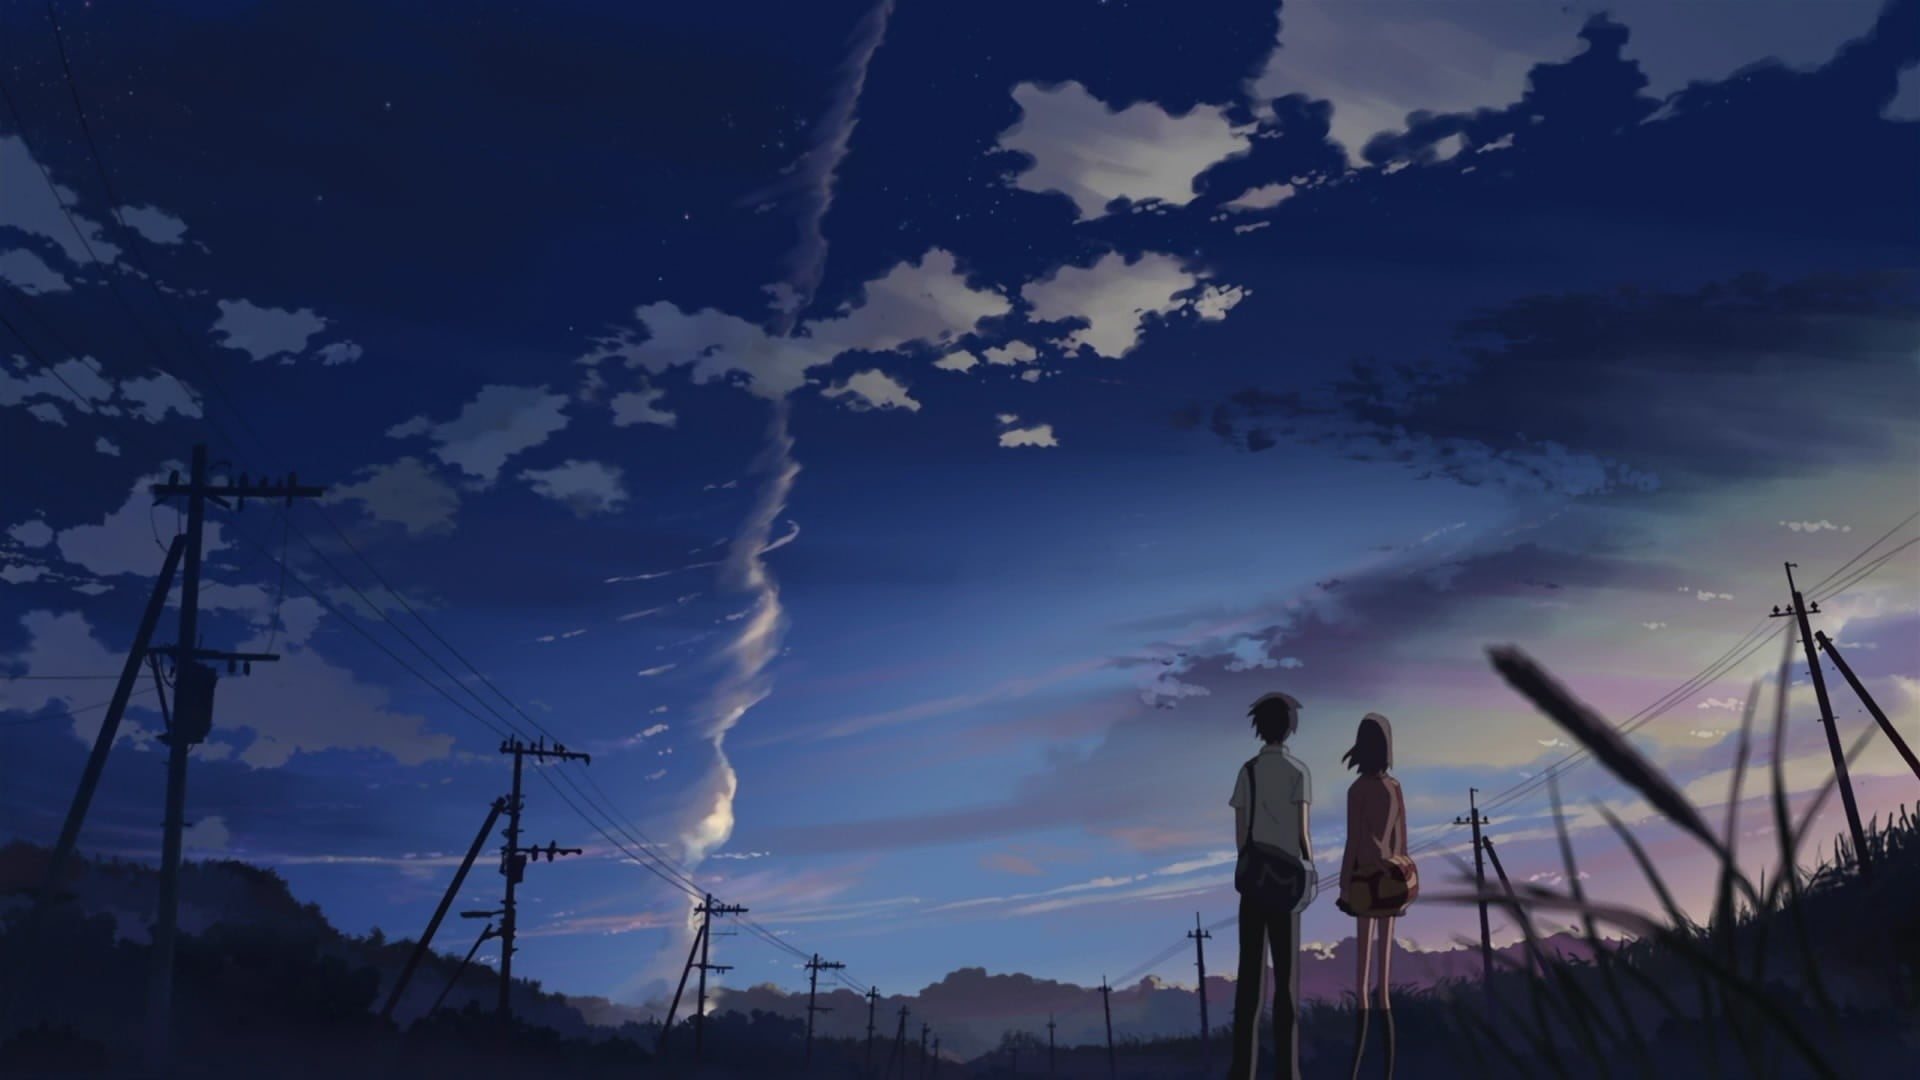 Your Name wallpaper, 5 Centimeters Per Second, anime, artwork